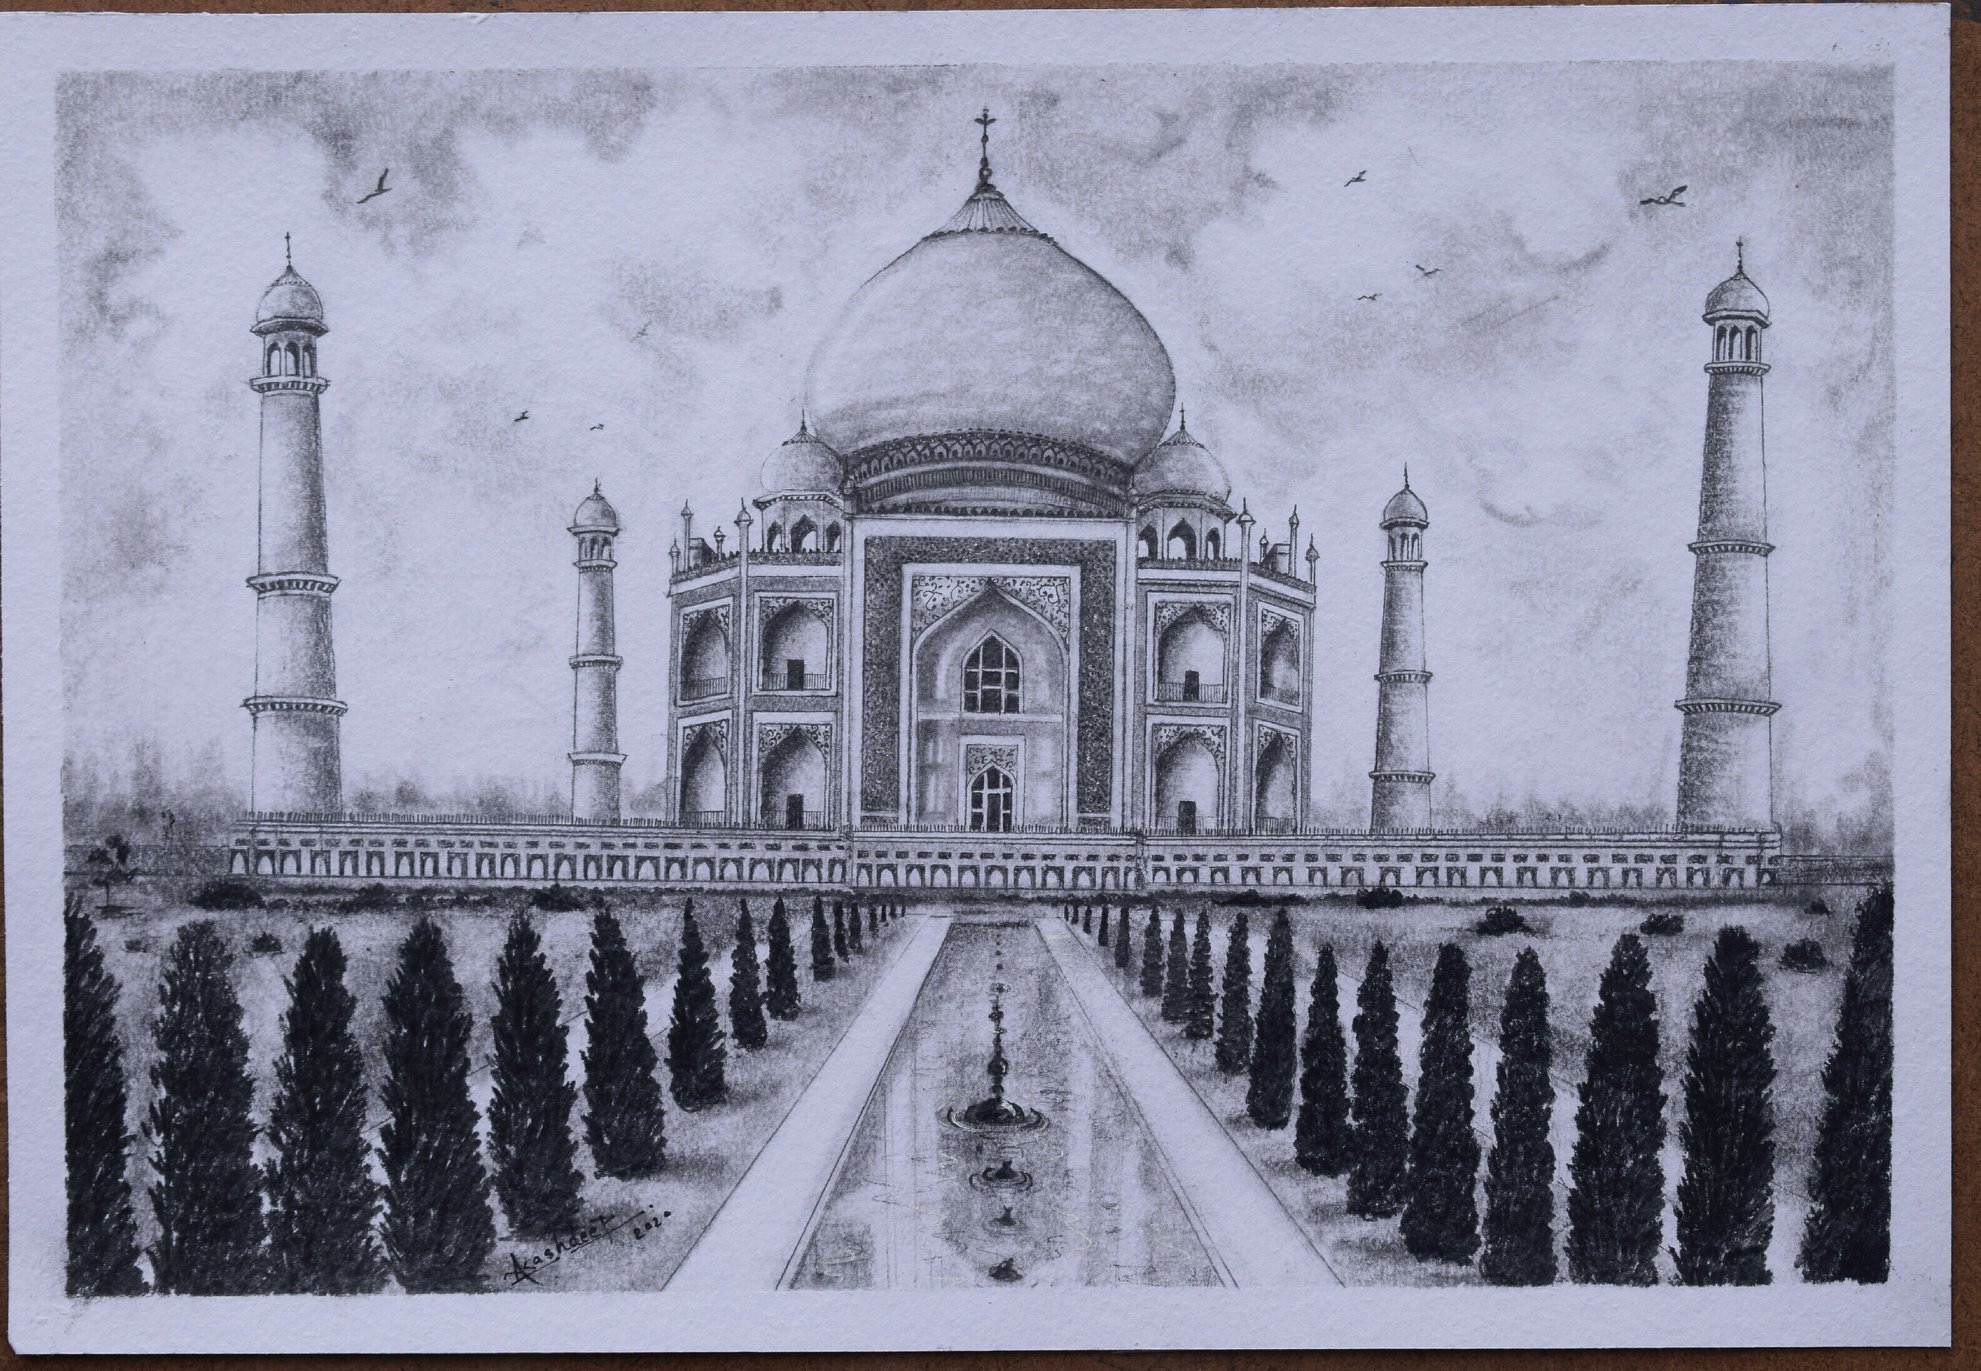 670 Historical Places India Sketch Images Stock Photos  Vectors   Shutterstock